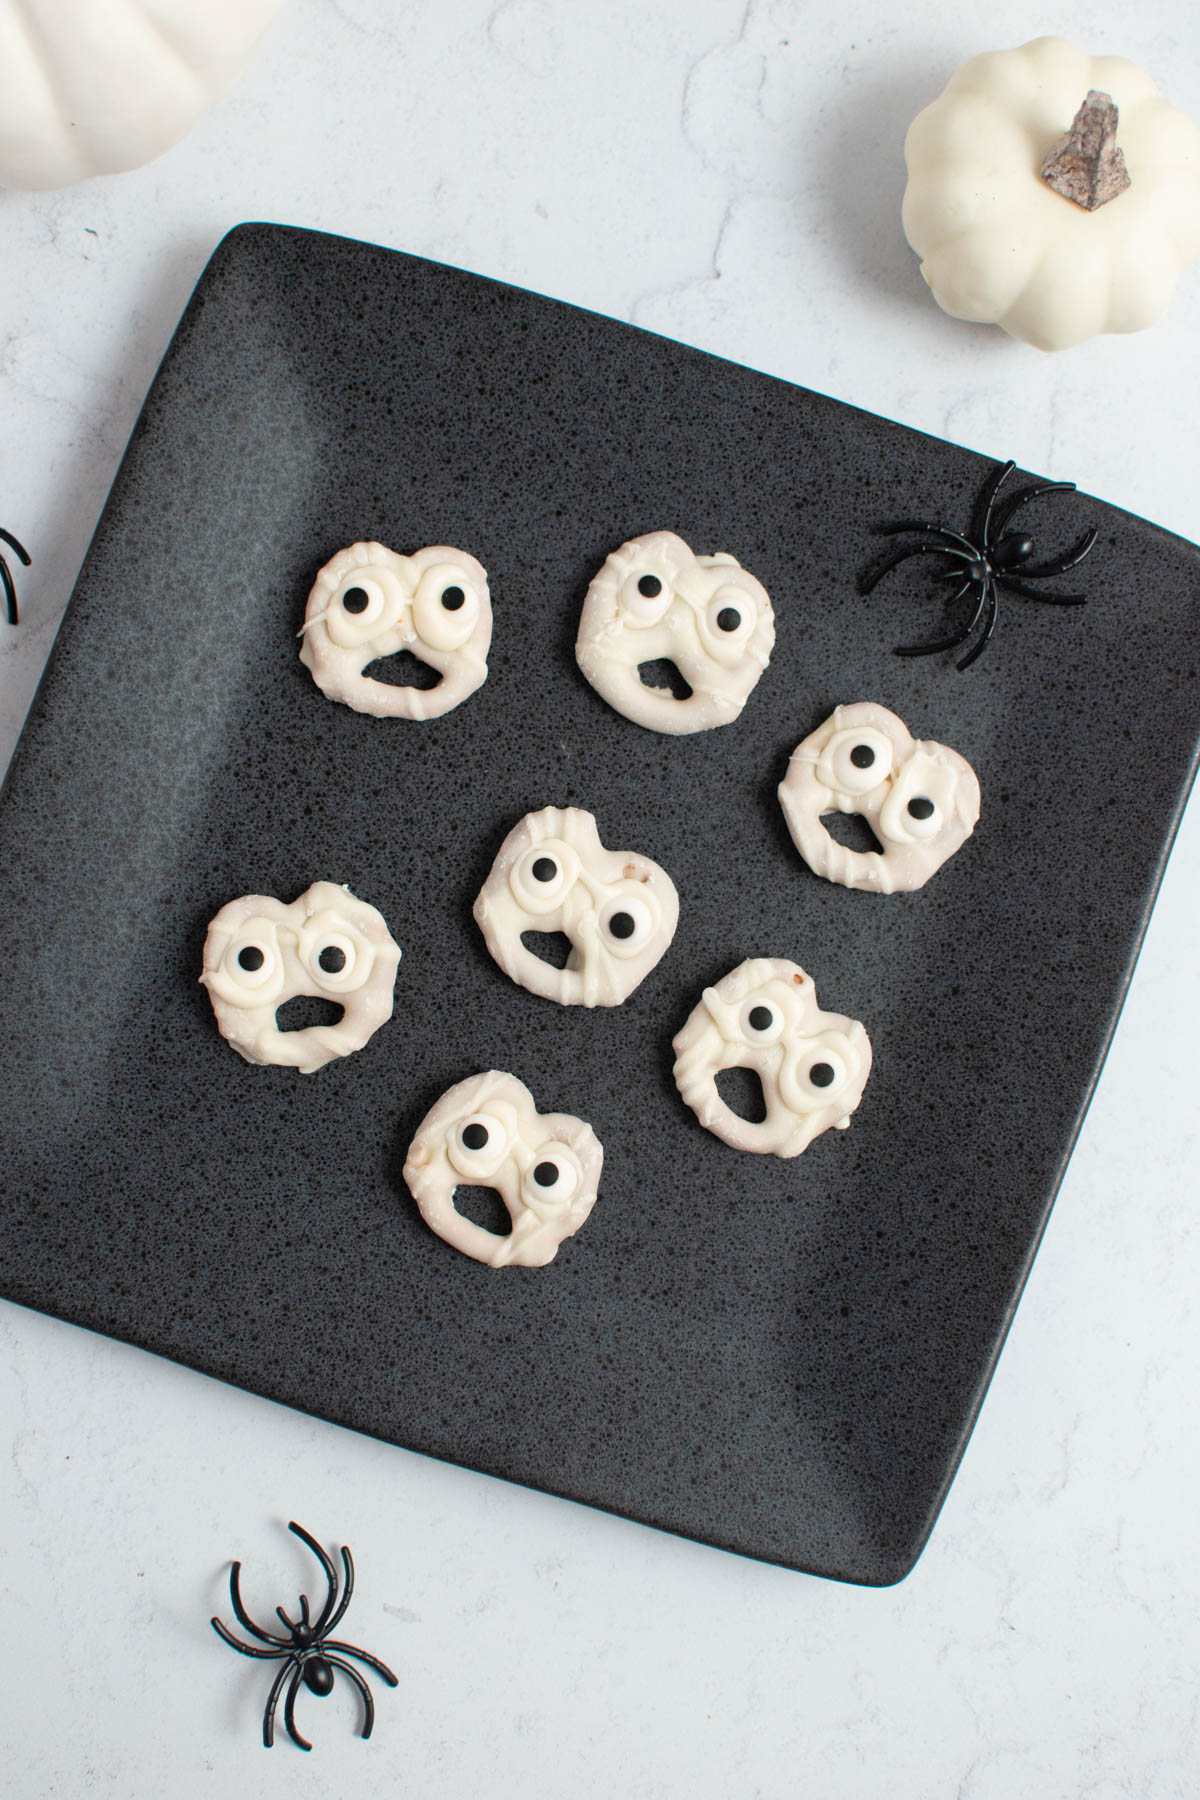 Seven white chocolate ghost pretzels on gray square plate with plastic spiders nearby.